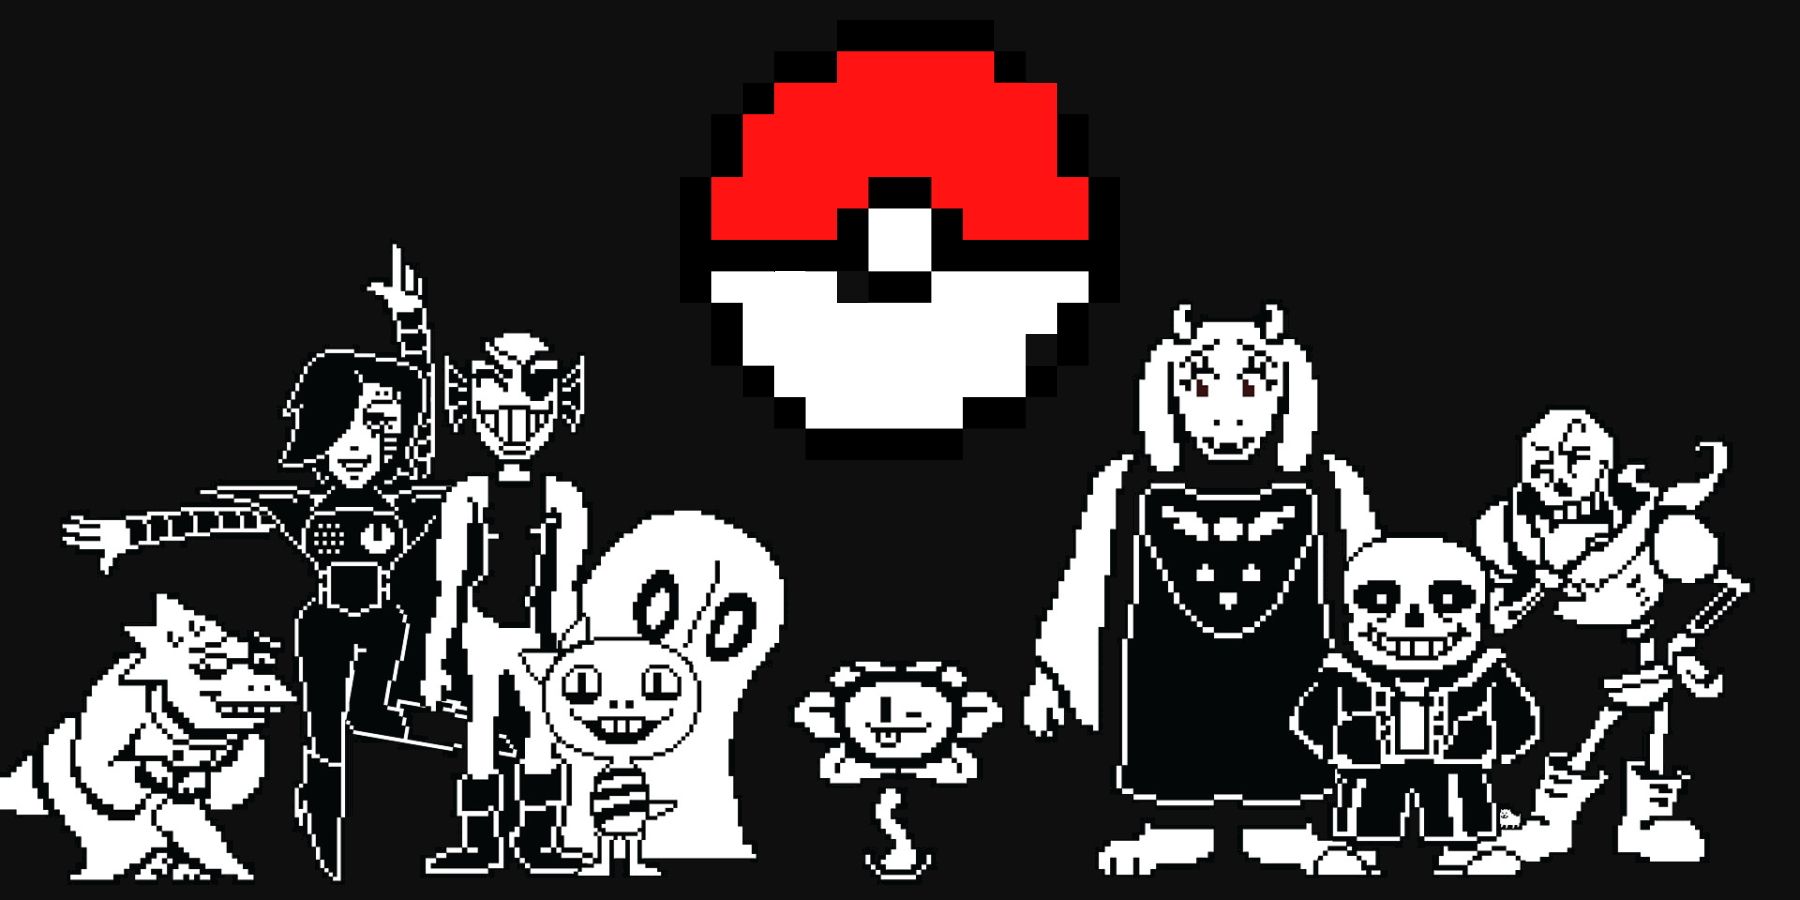 Undertale characters with Pokeball from Pokemon